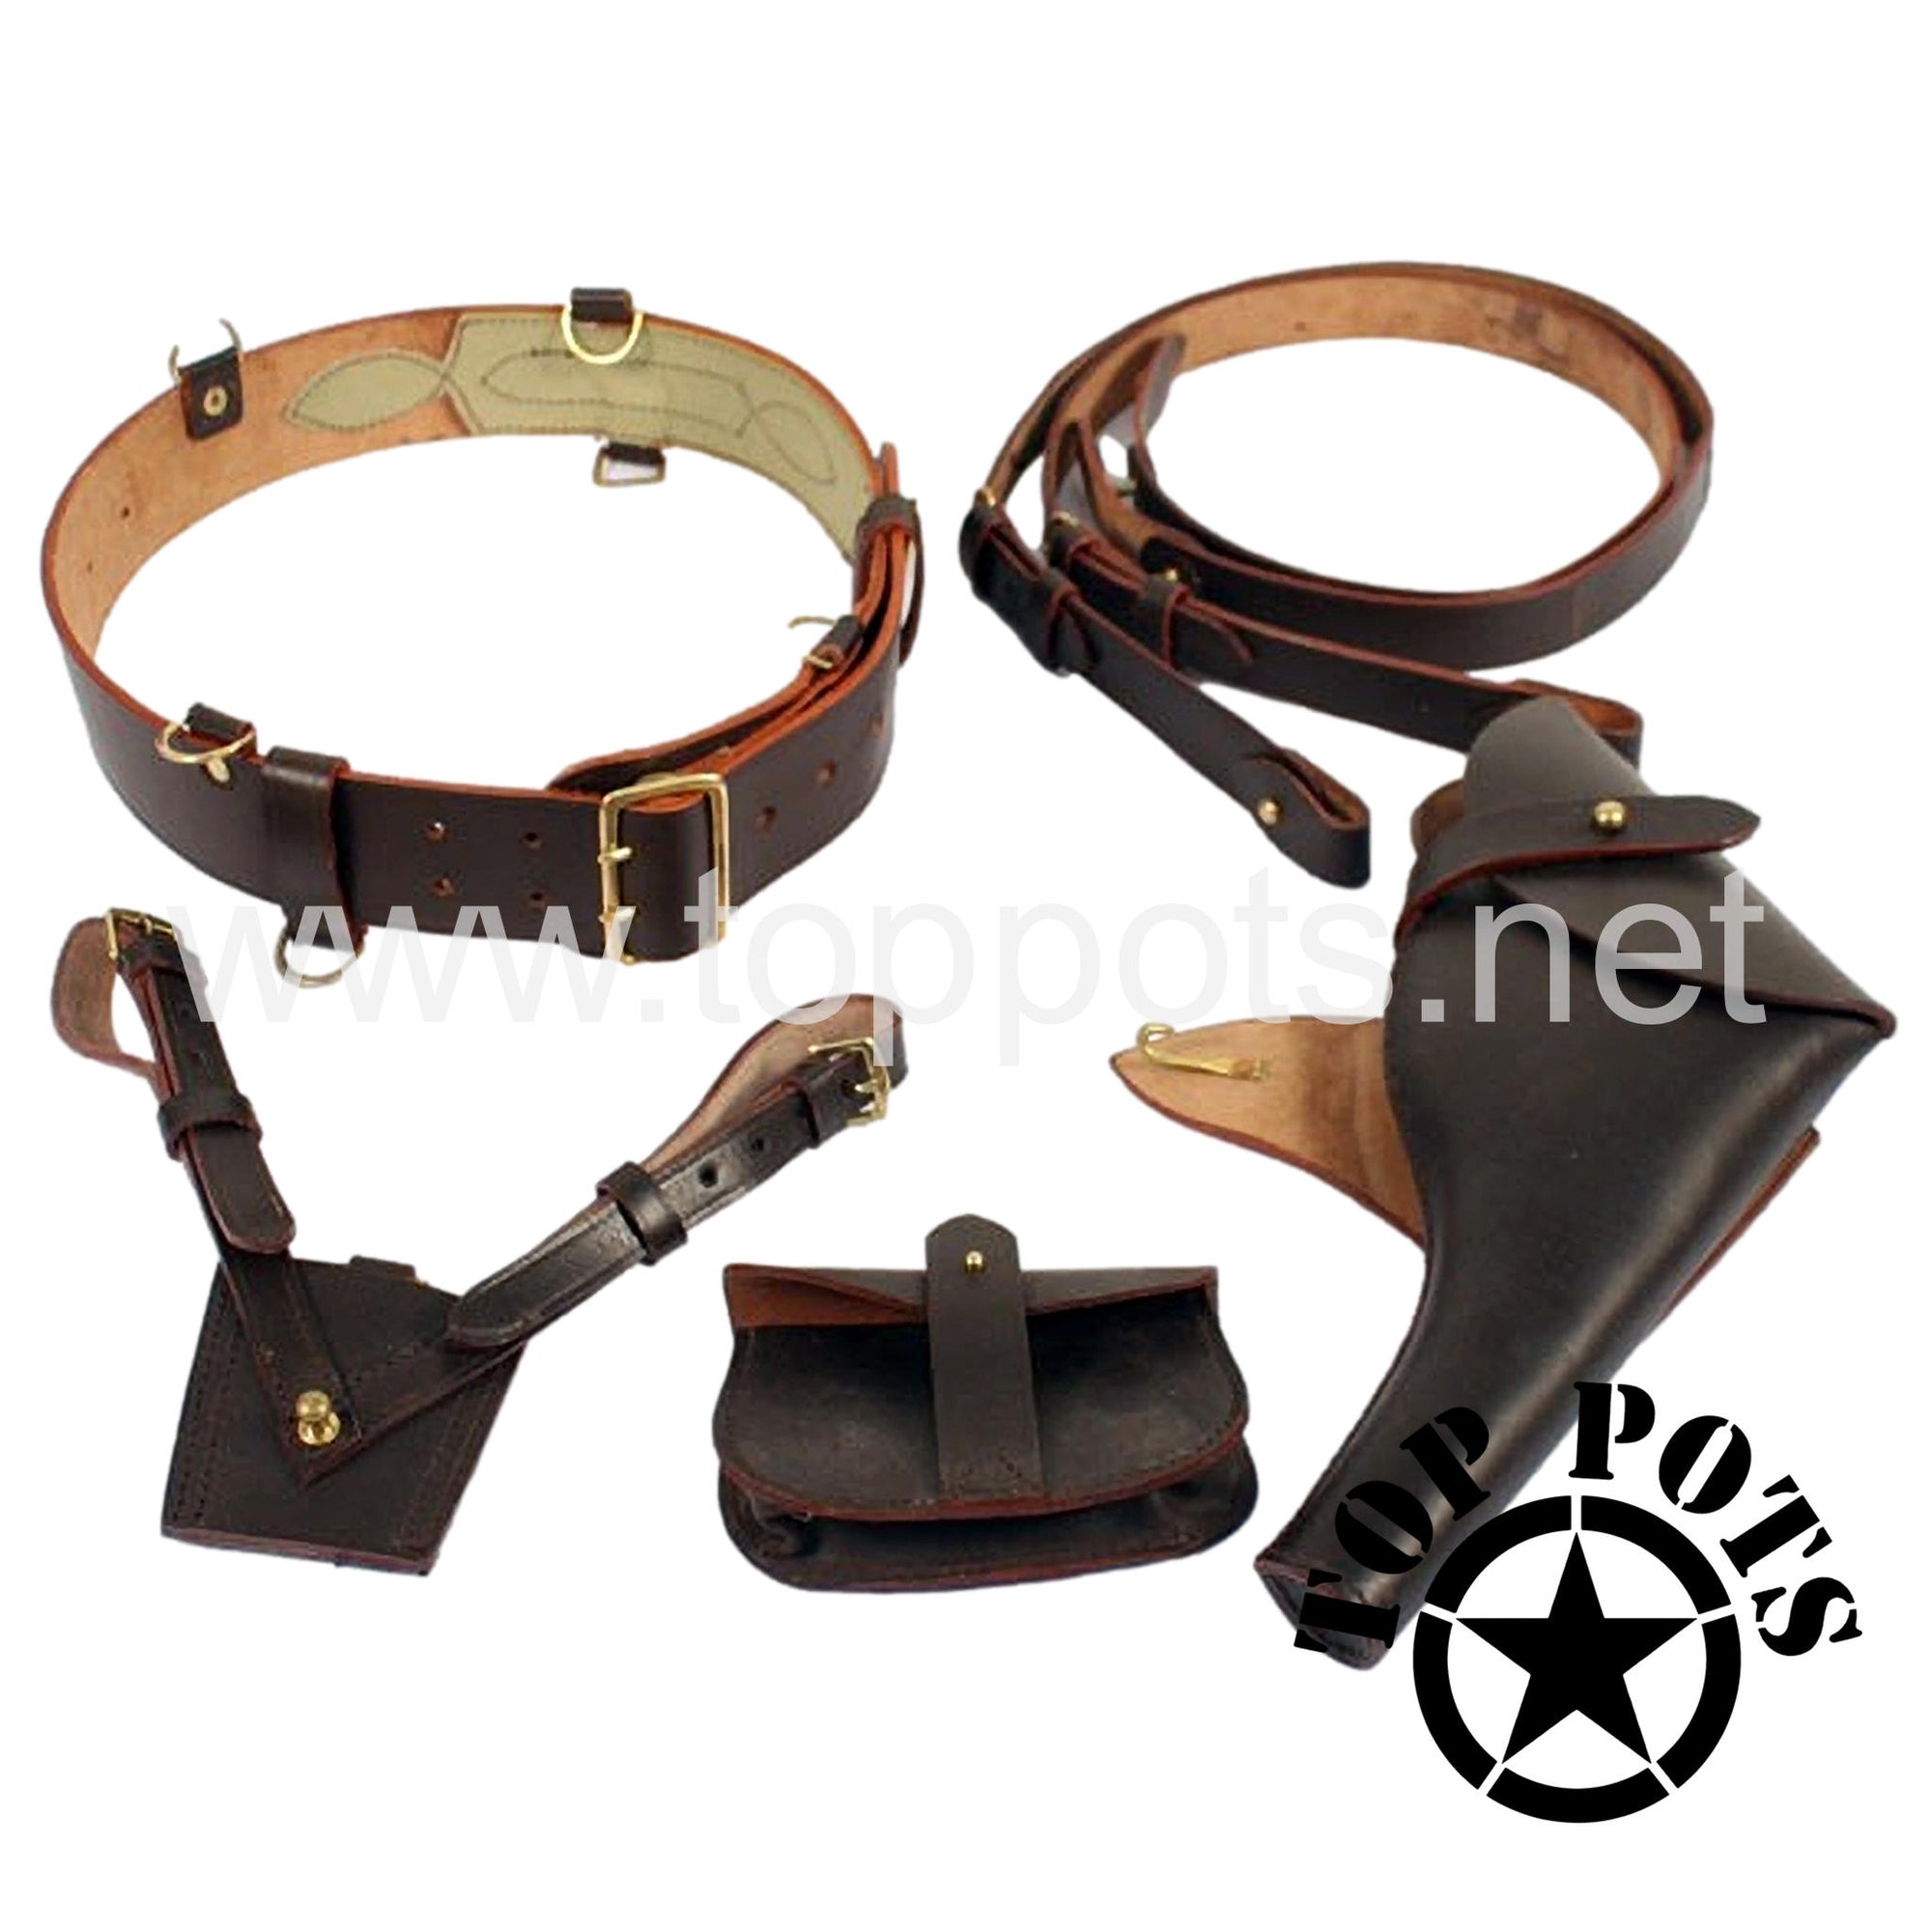 WWII British Army Reproduction Leather British Officer Sam Browne Belt – Complete Set